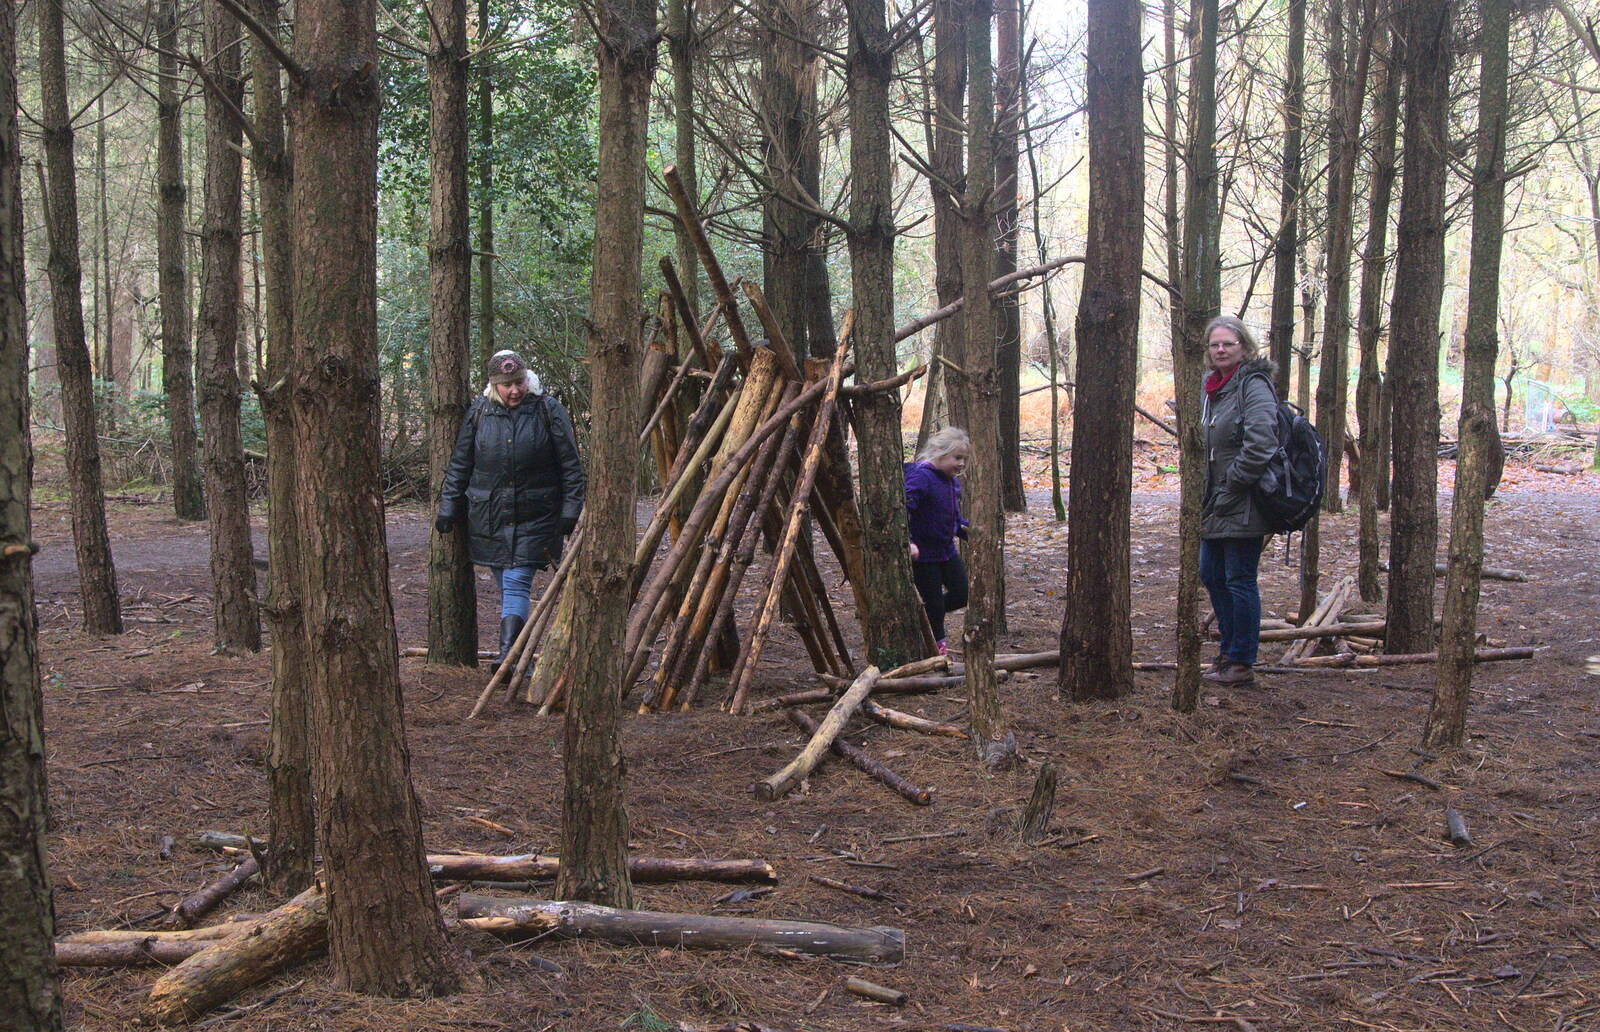 The den is inspected from A Day at High Lodge, Brandon, Suffolk - 3rd January 2017